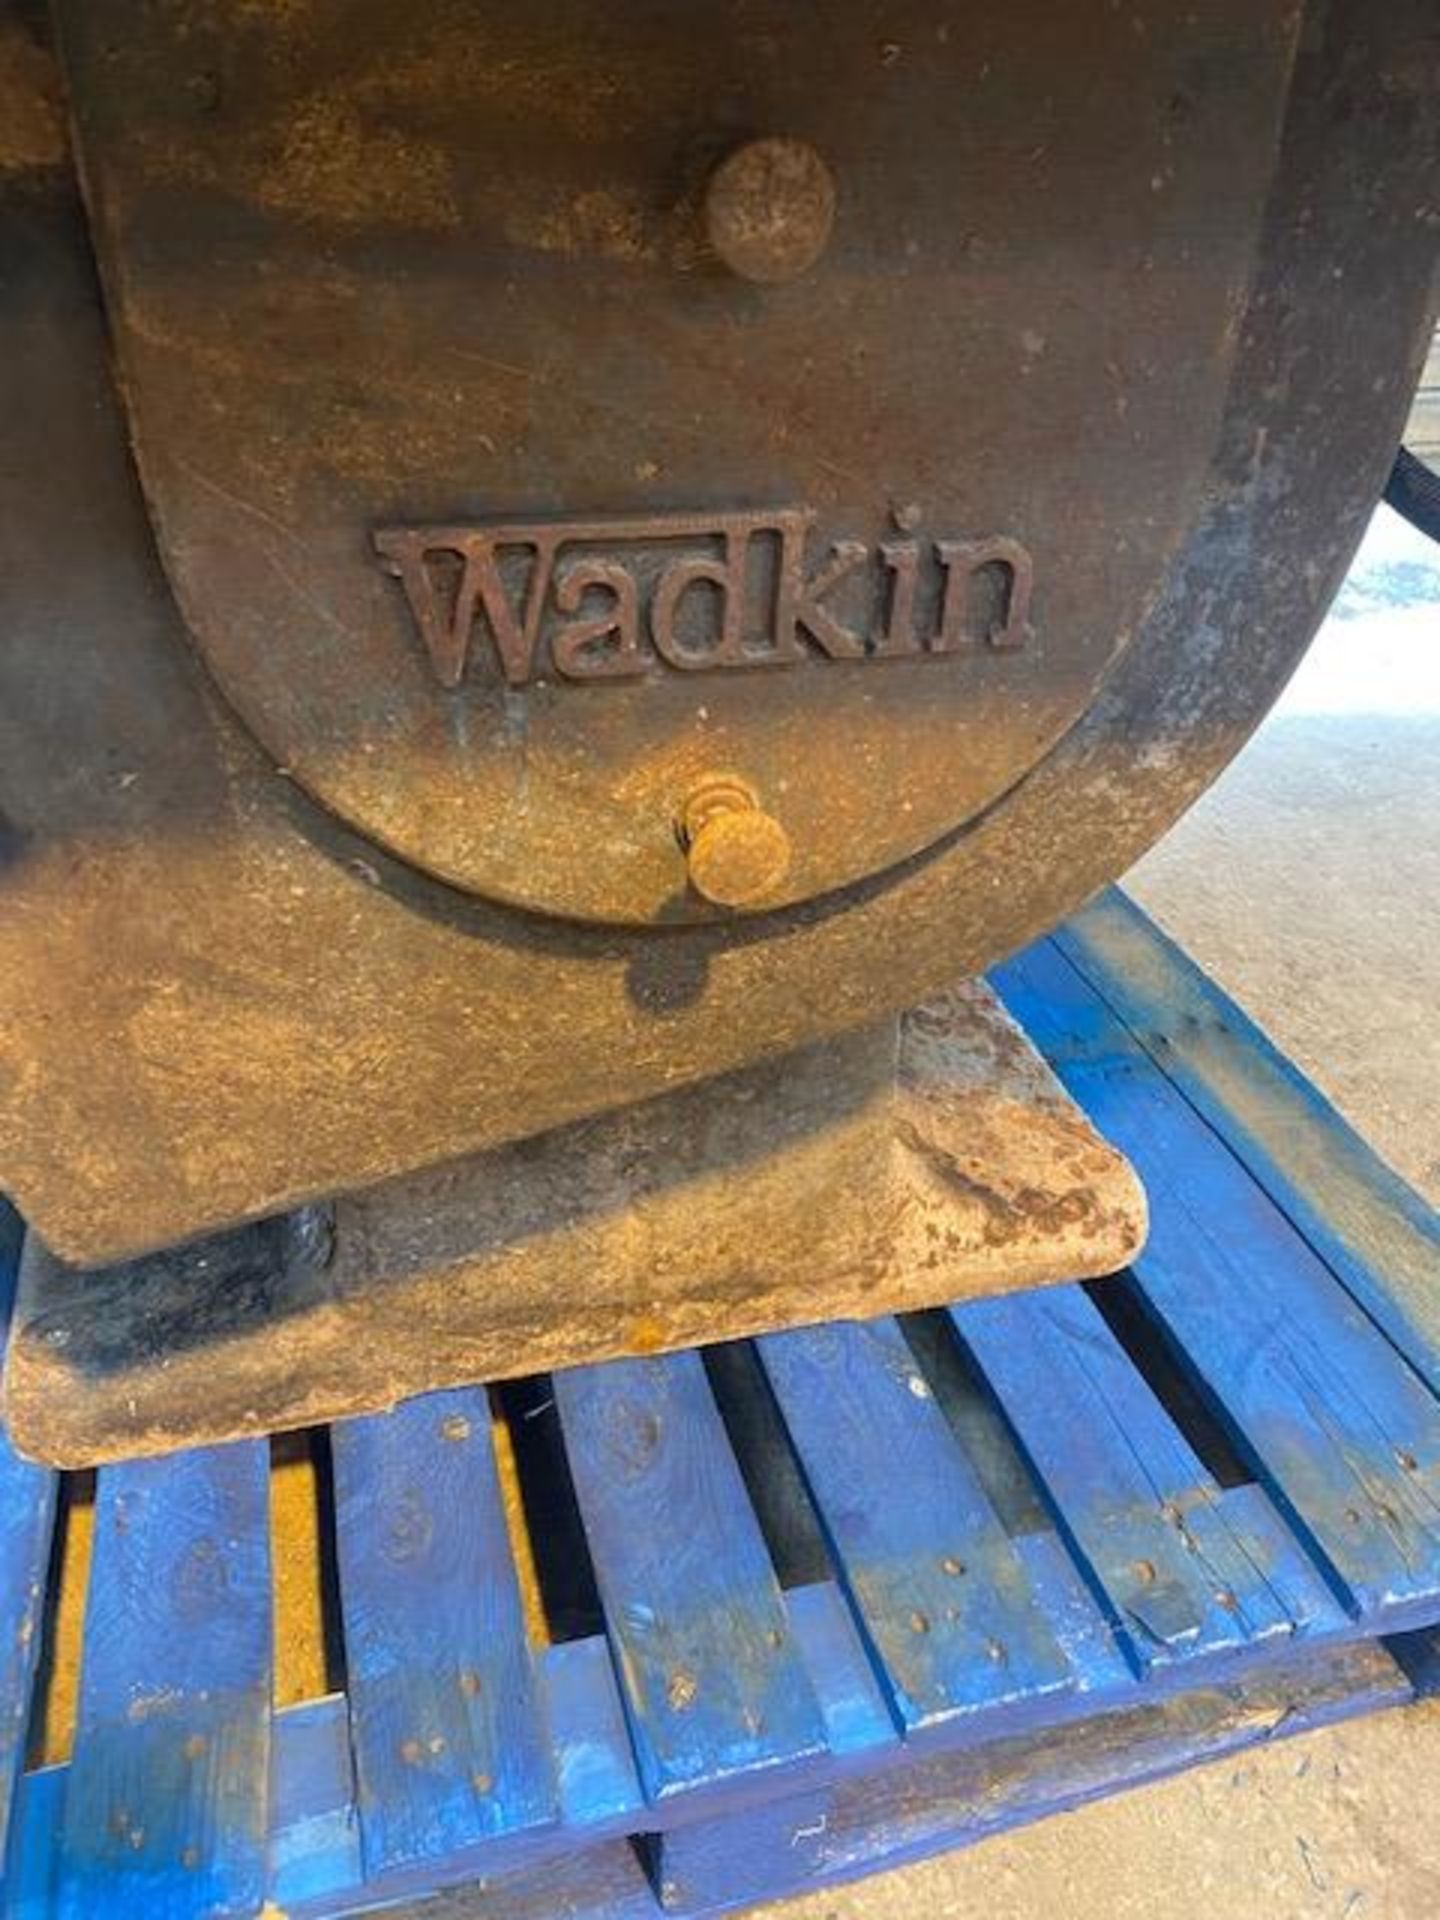 Wadkin SO 18in. Rip Saw, serial no. 225, with rise and fall to the bed, 16in. blade fitted, with a - Image 3 of 9